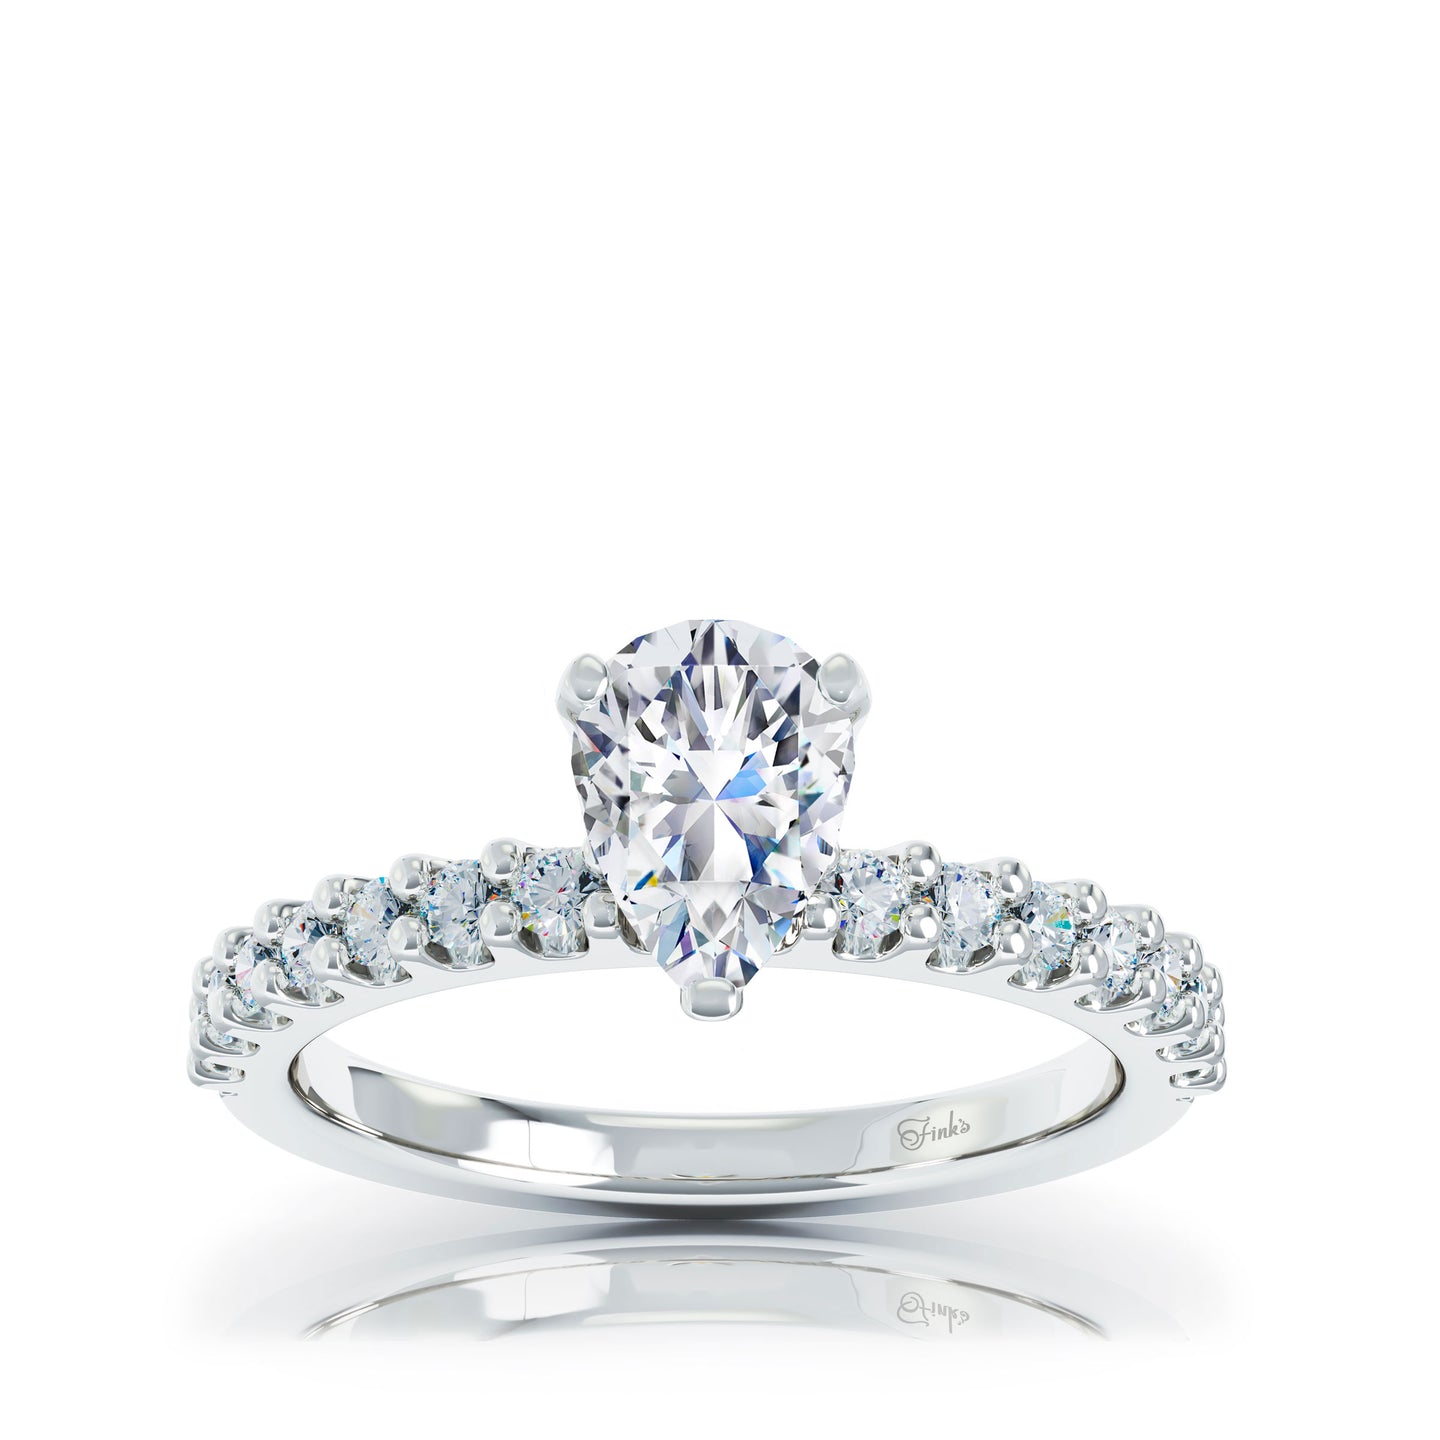 The Studio Collection Pear Cut Center Diamond and Diamond Shank Engagement Ring